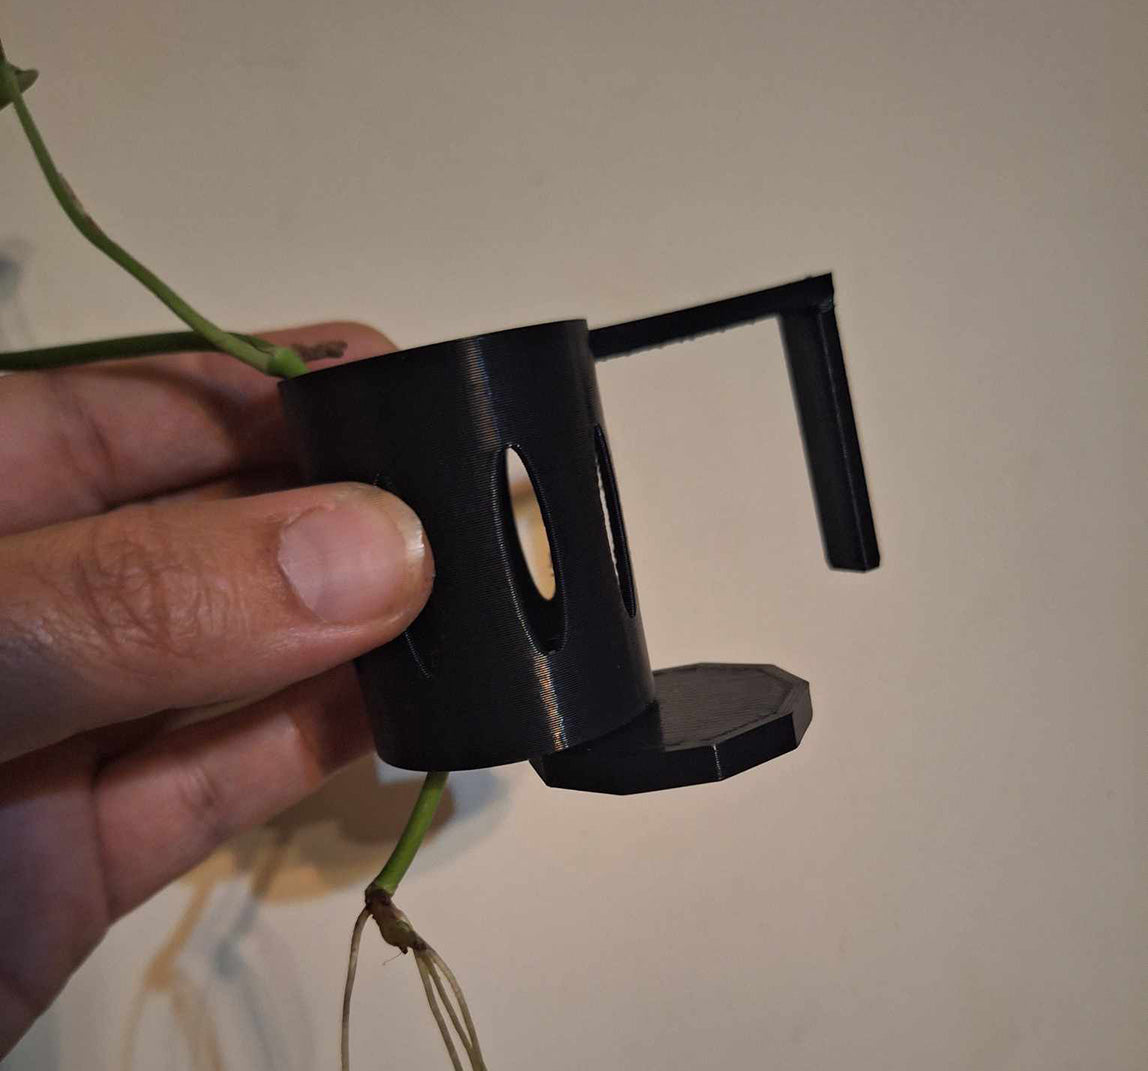 A hand holding a black Hang-On Plant Buddy rimmed aquarium tanks, featuring a built-in leveler. The accessory is 3D-printed with Overture PETG filament and shown with a plant's roots passing through it, illustrating its practical use in supporting aquatic plants.